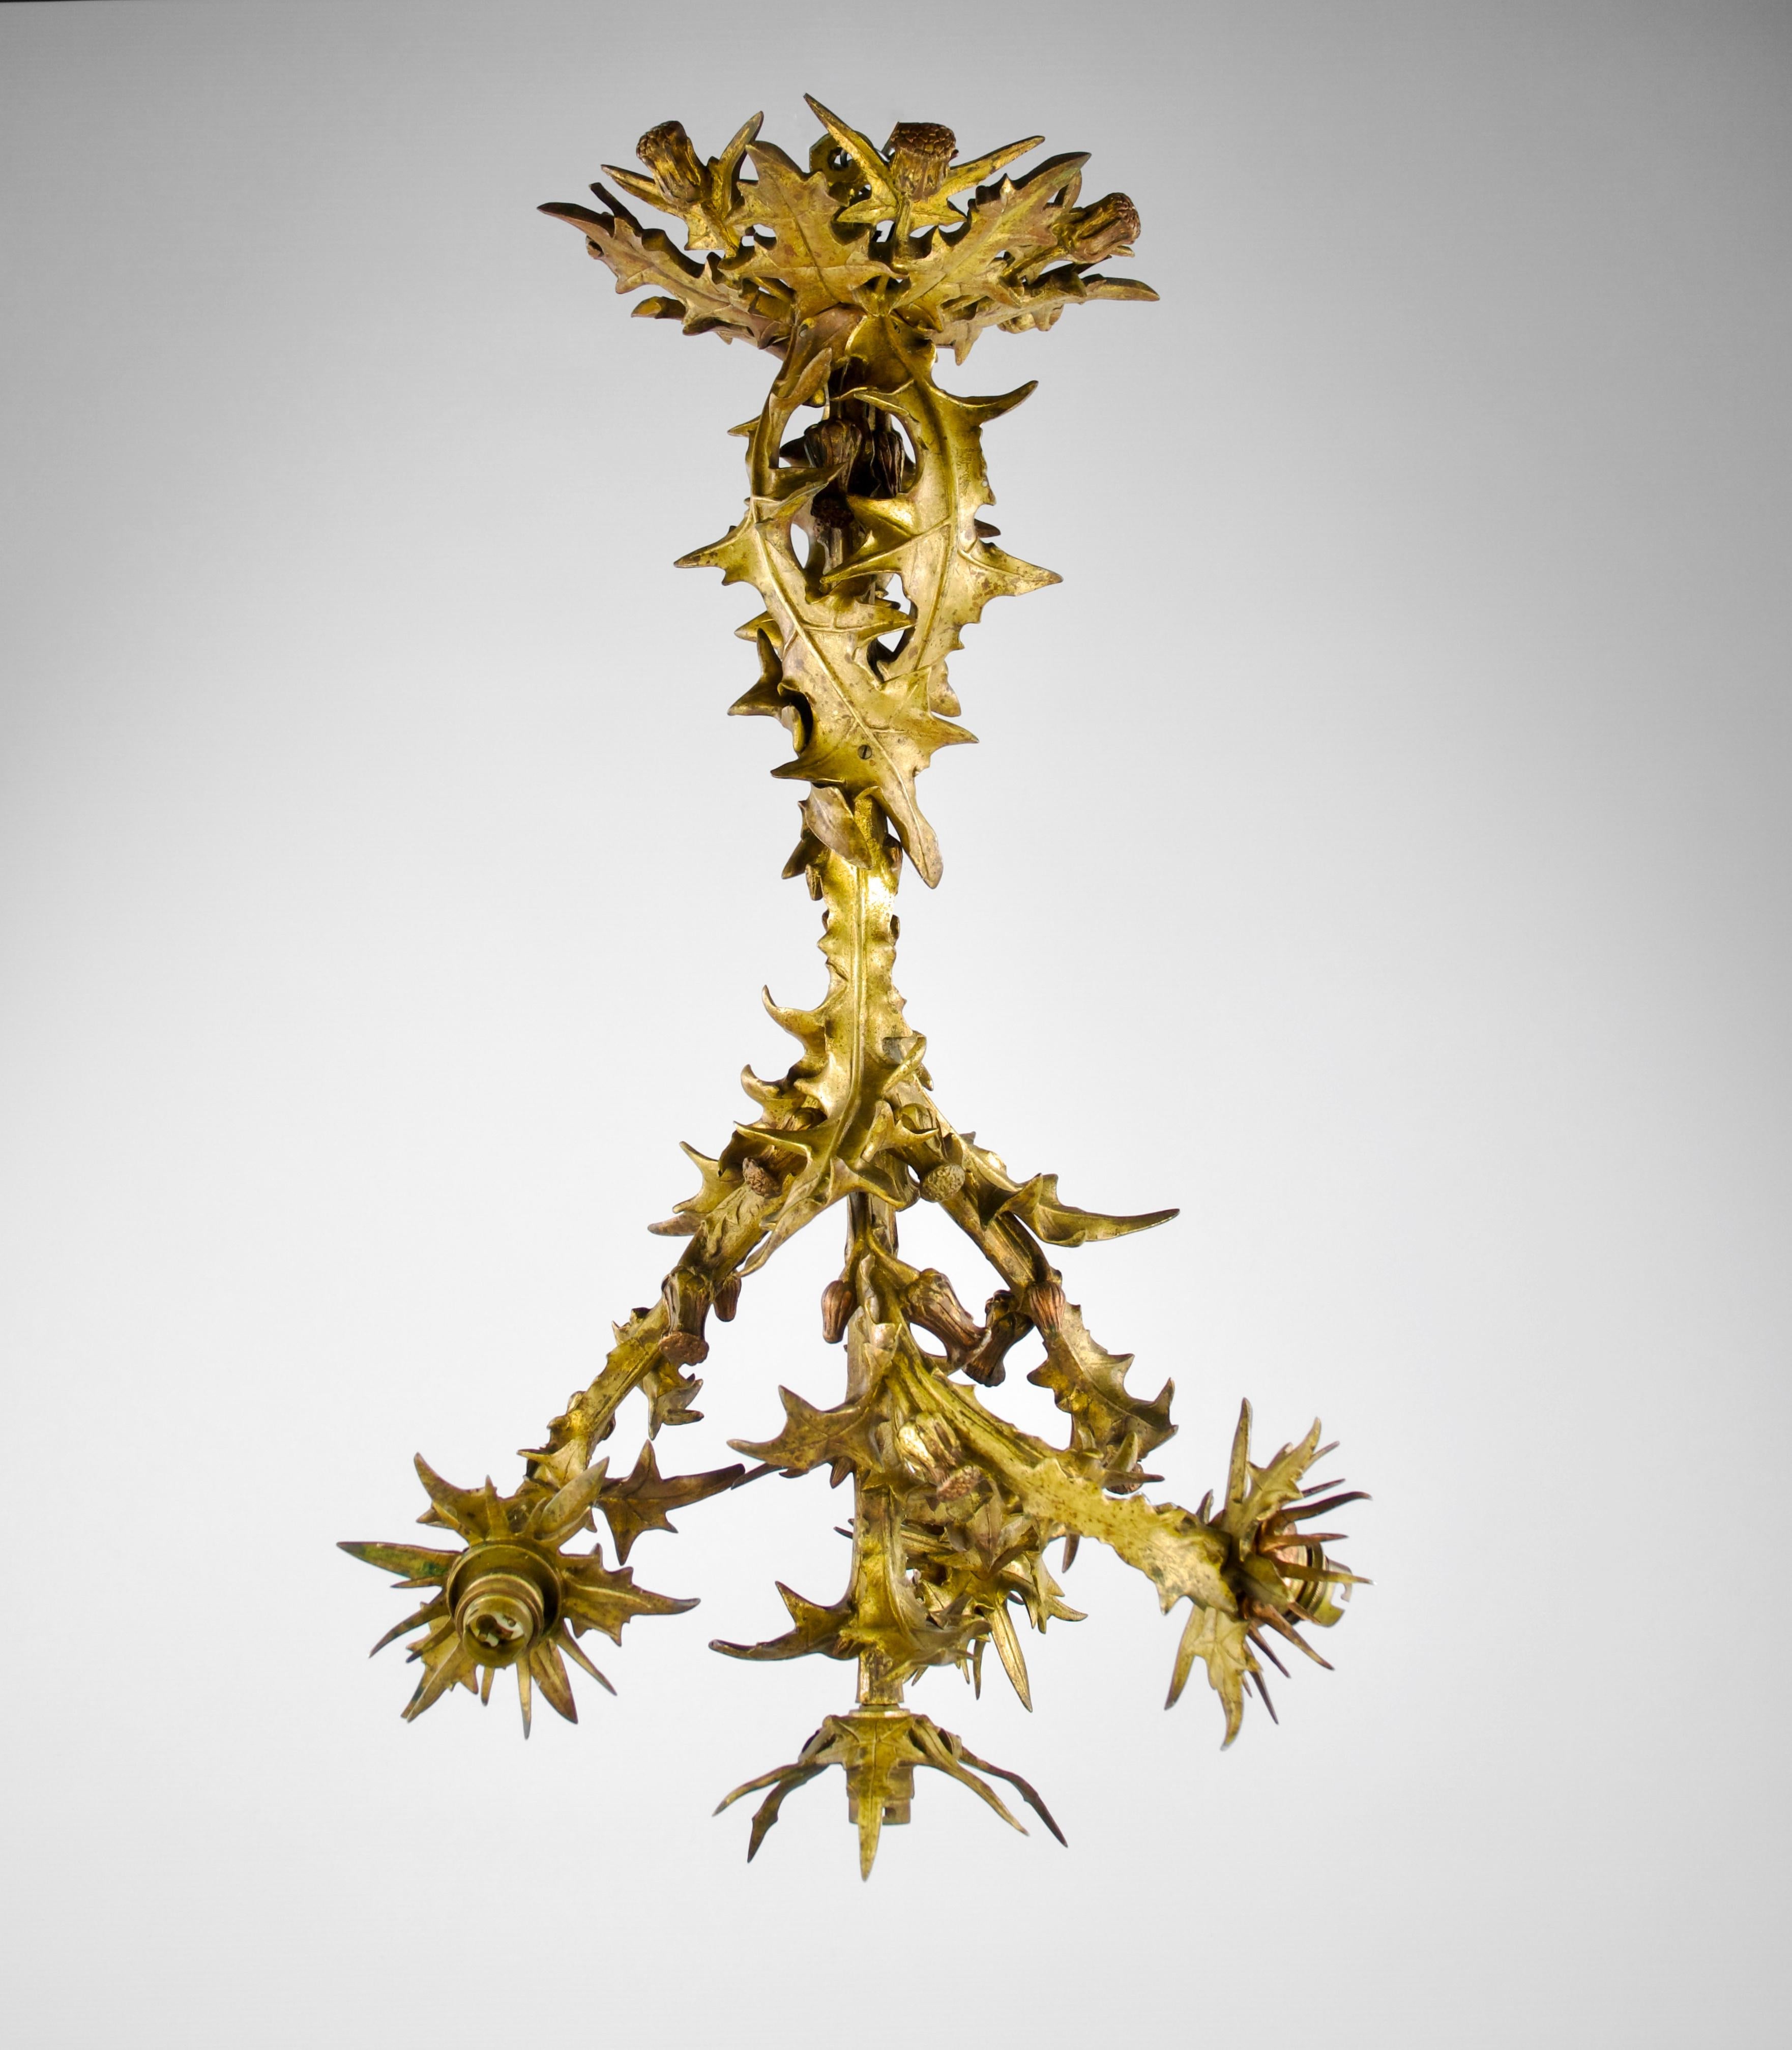 Magnificent gold and orange patina bronze Art Nouveau thistle chandelier by the Emile Collin & Cie manufacture, France 1900s. Stamp of the manufacture present.

Very good condition. Natural oxidation seen in photos.

Dimensions in cm ( H x D ) : 68